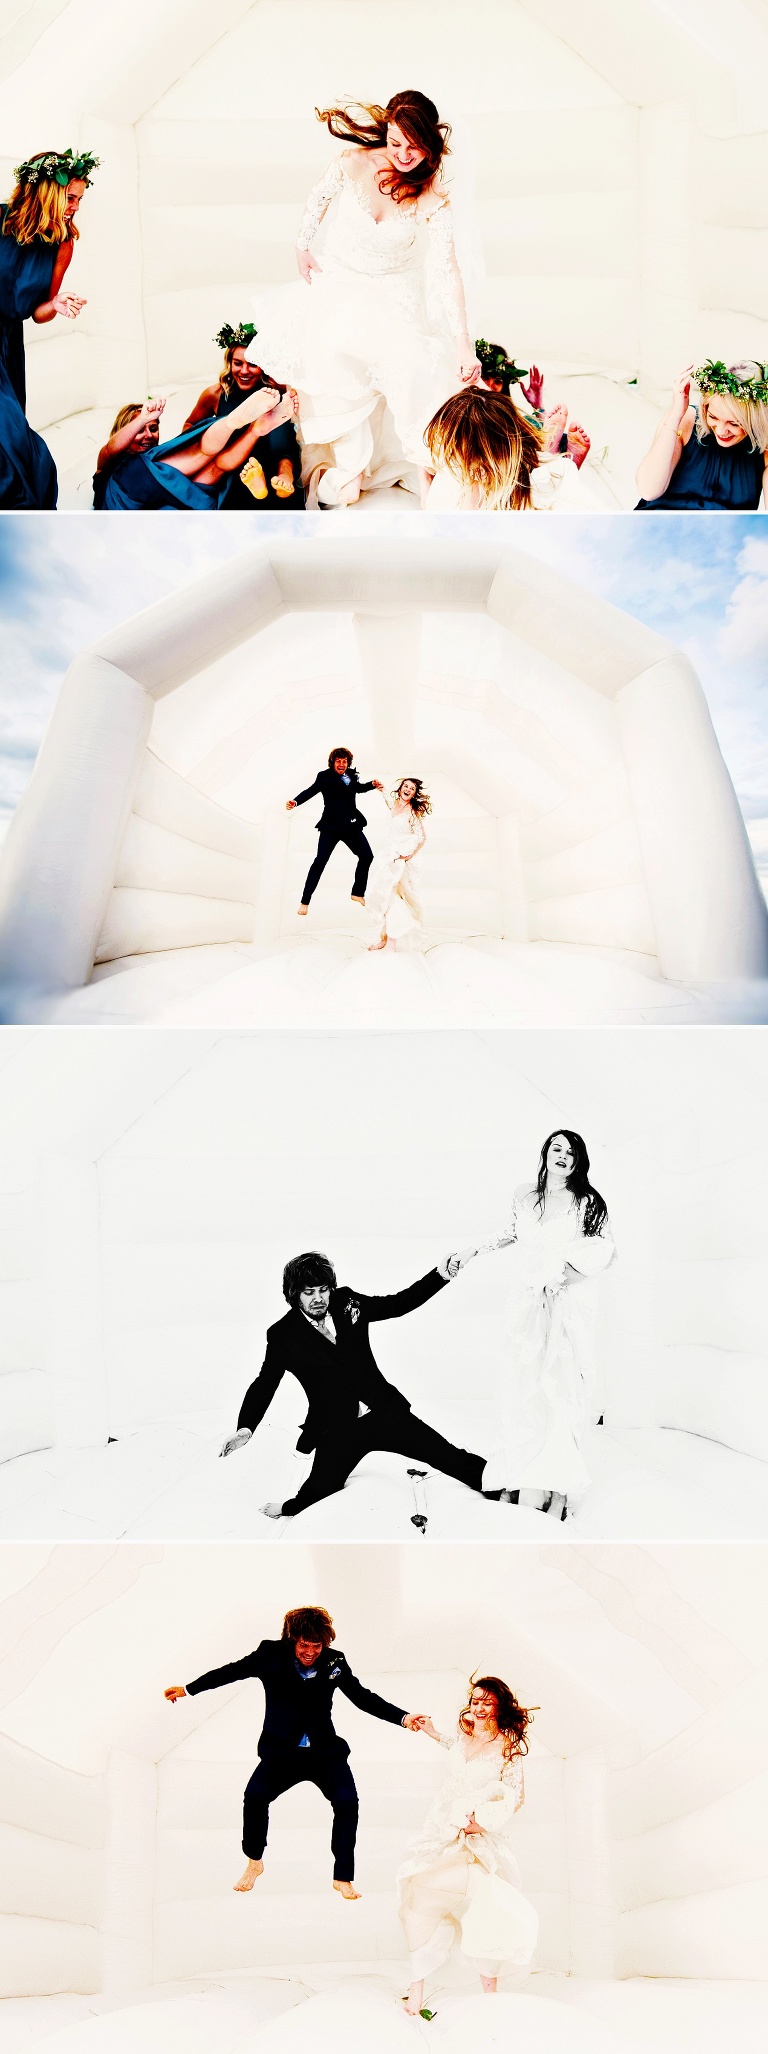 Bride and groom jumping on a white bouncy castle at their outdoor wedding.